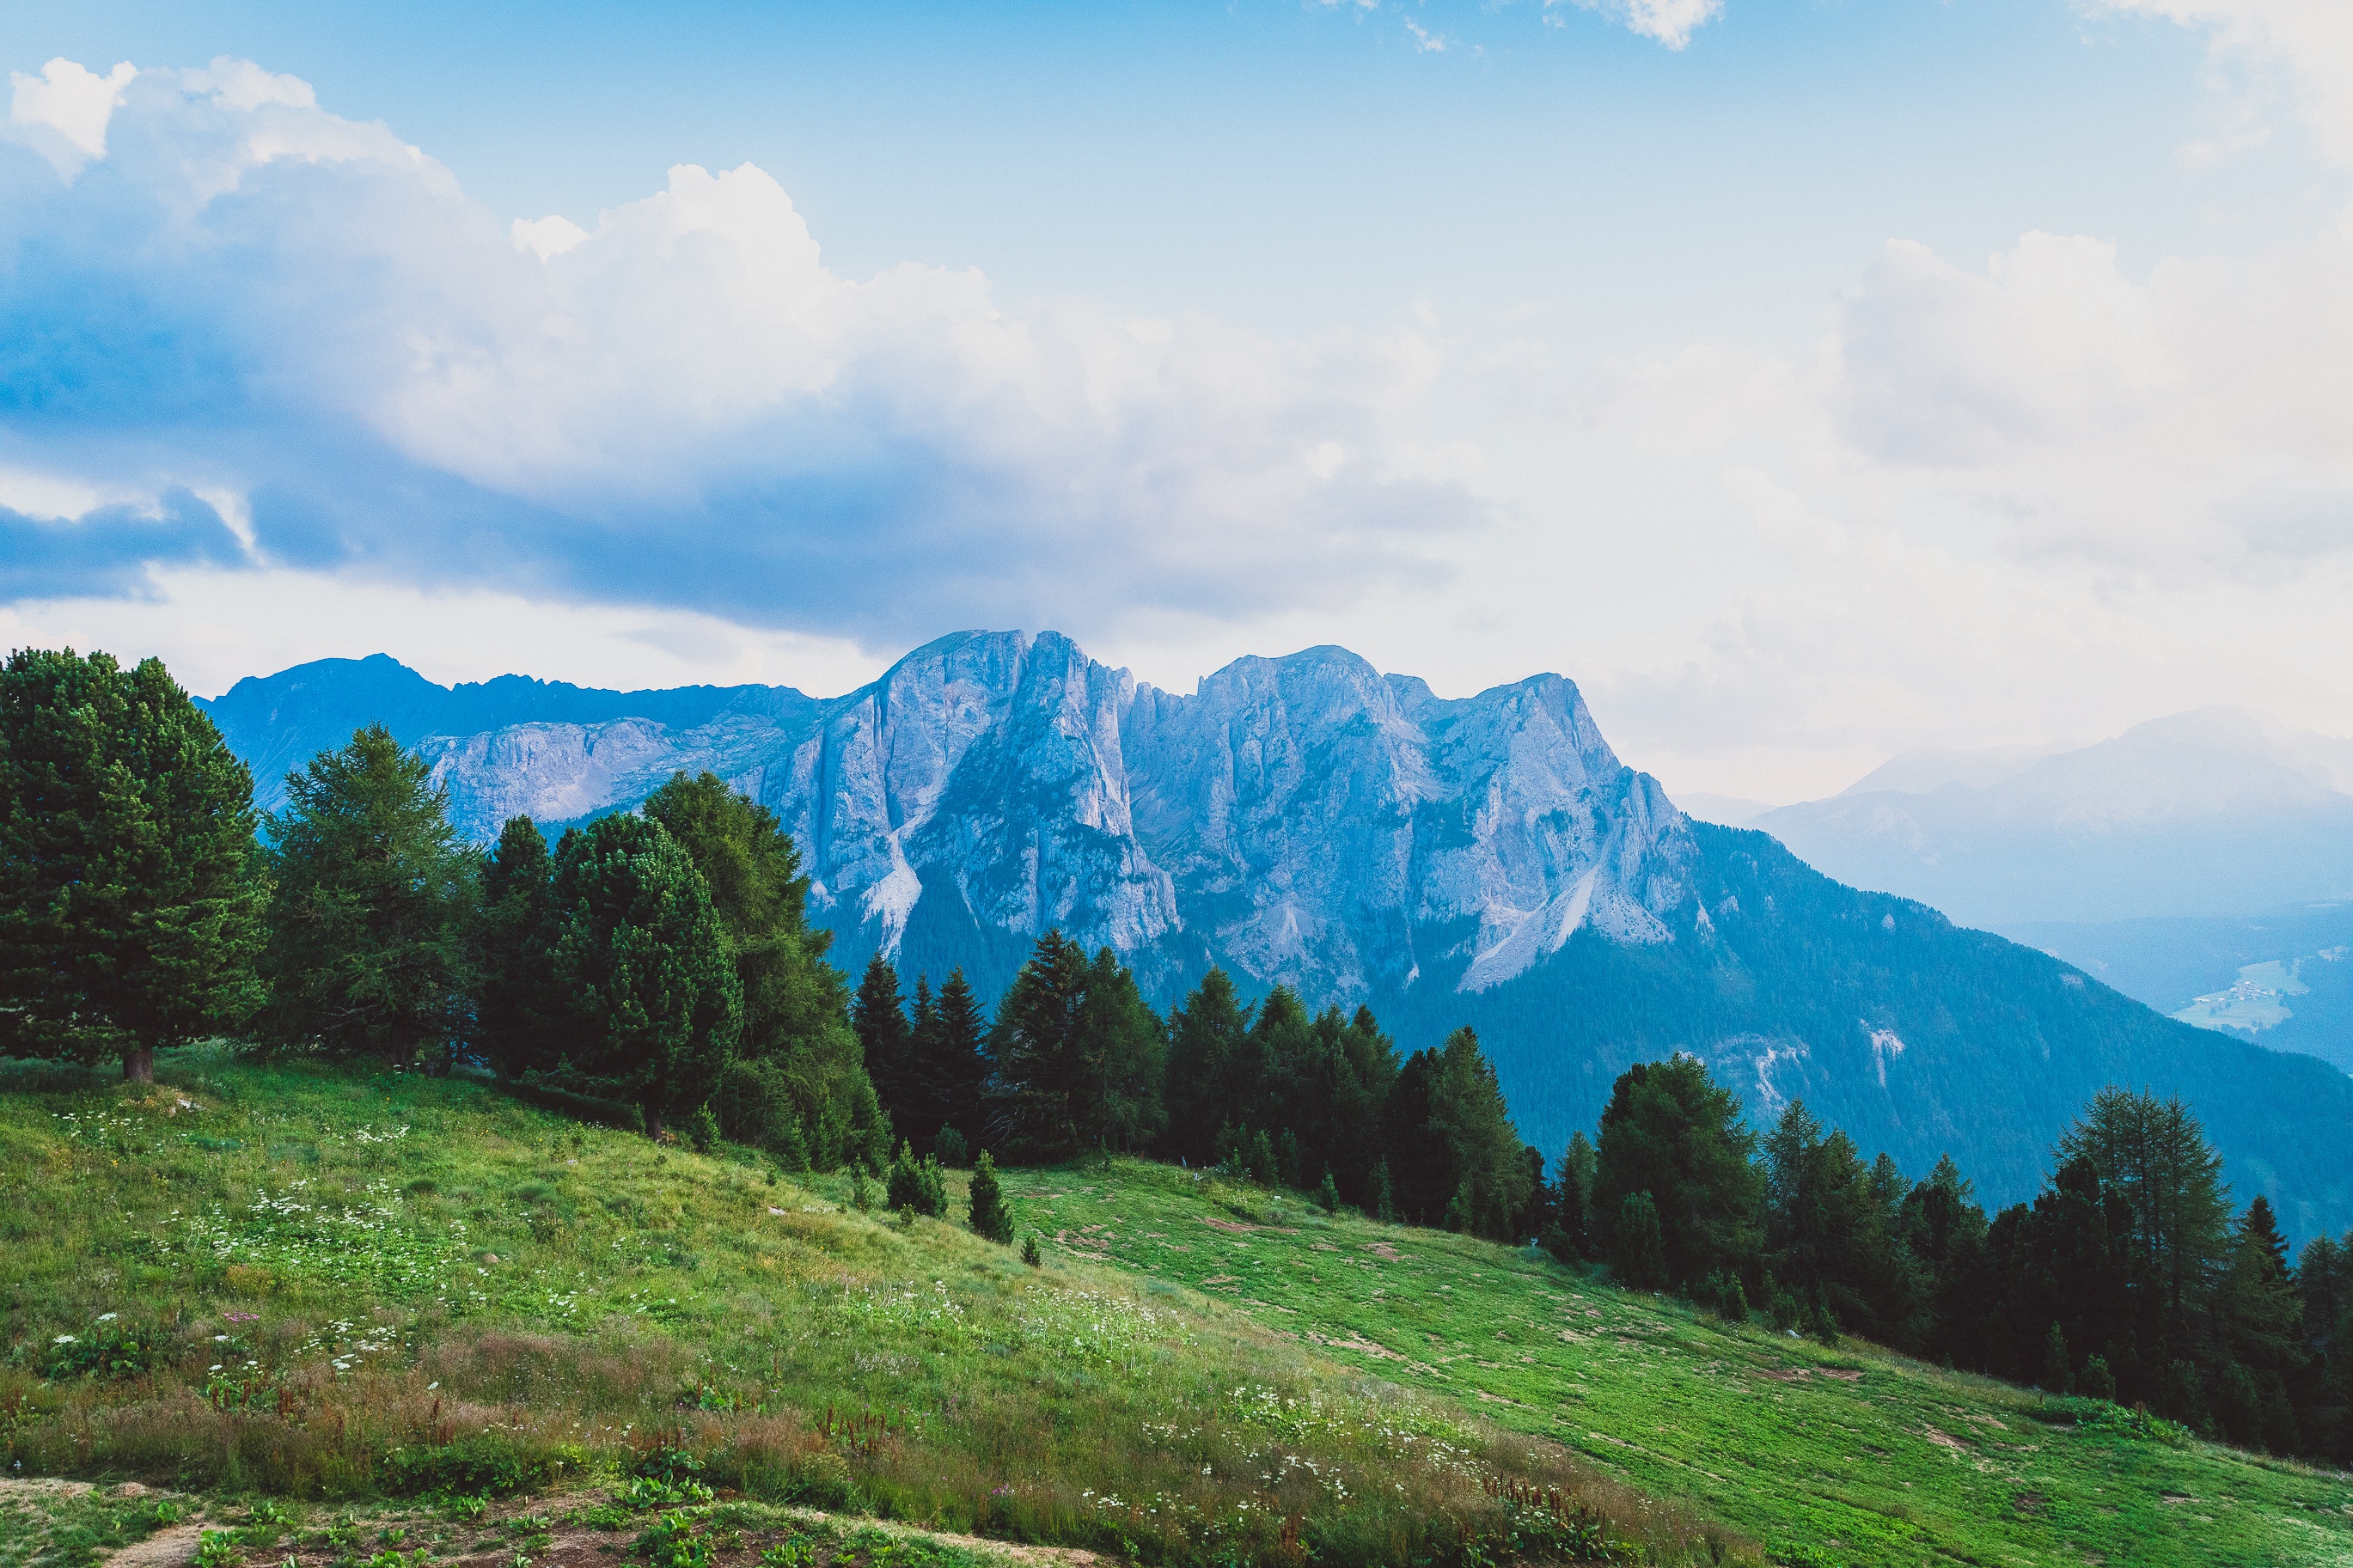 dolomites, nature, italy, mountains, meadow, val di fassa